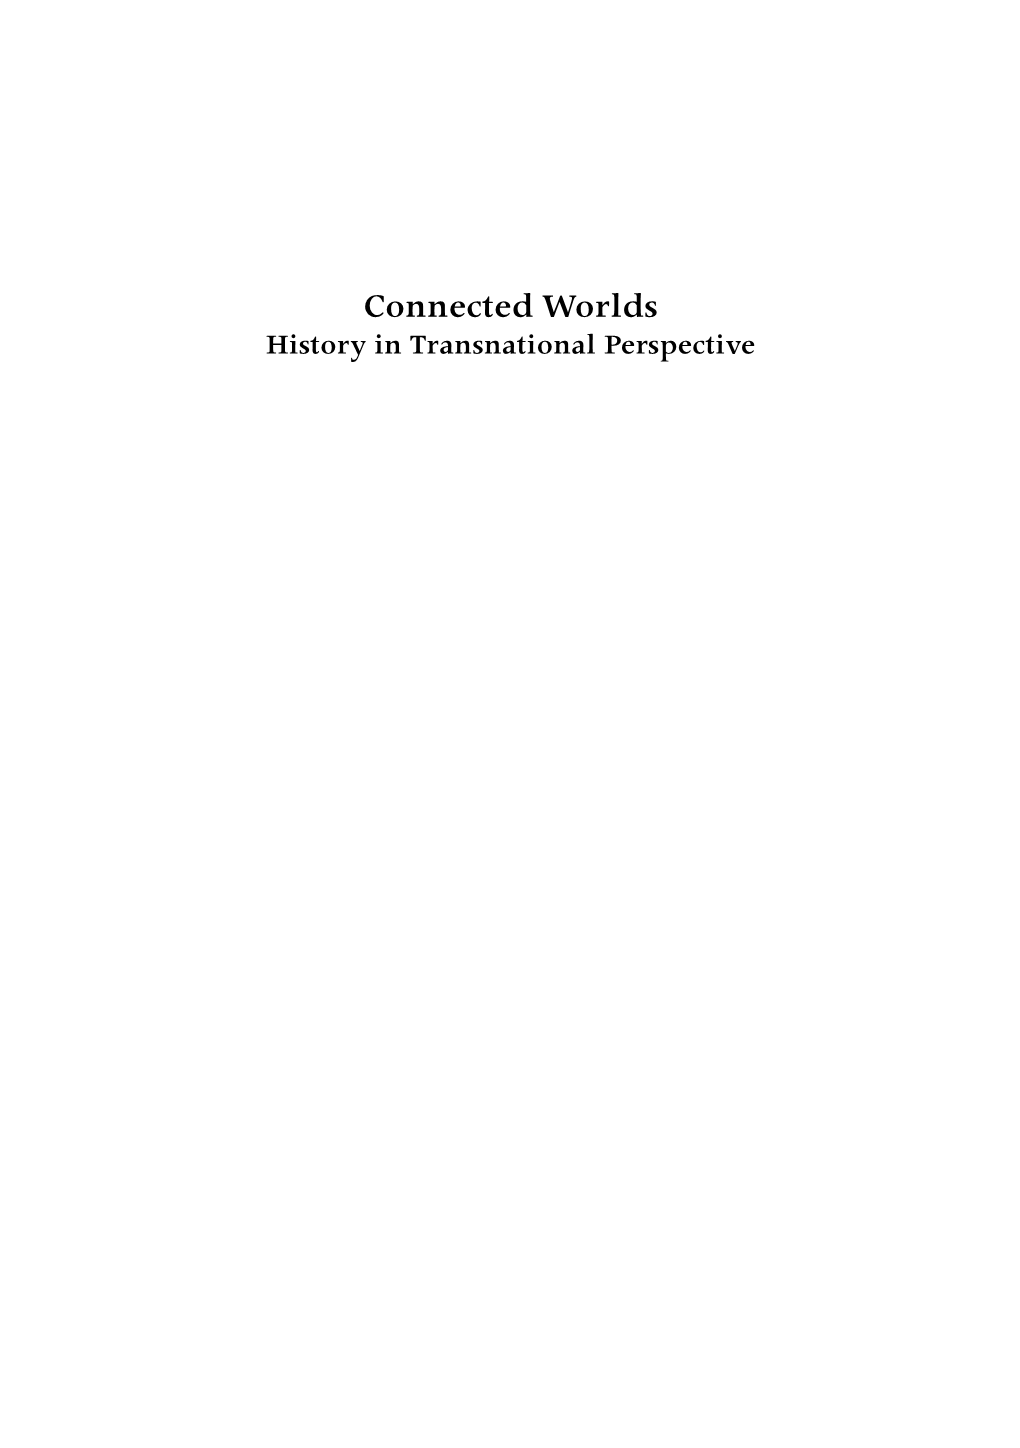 Connected Worlds History in Transnational Perspective